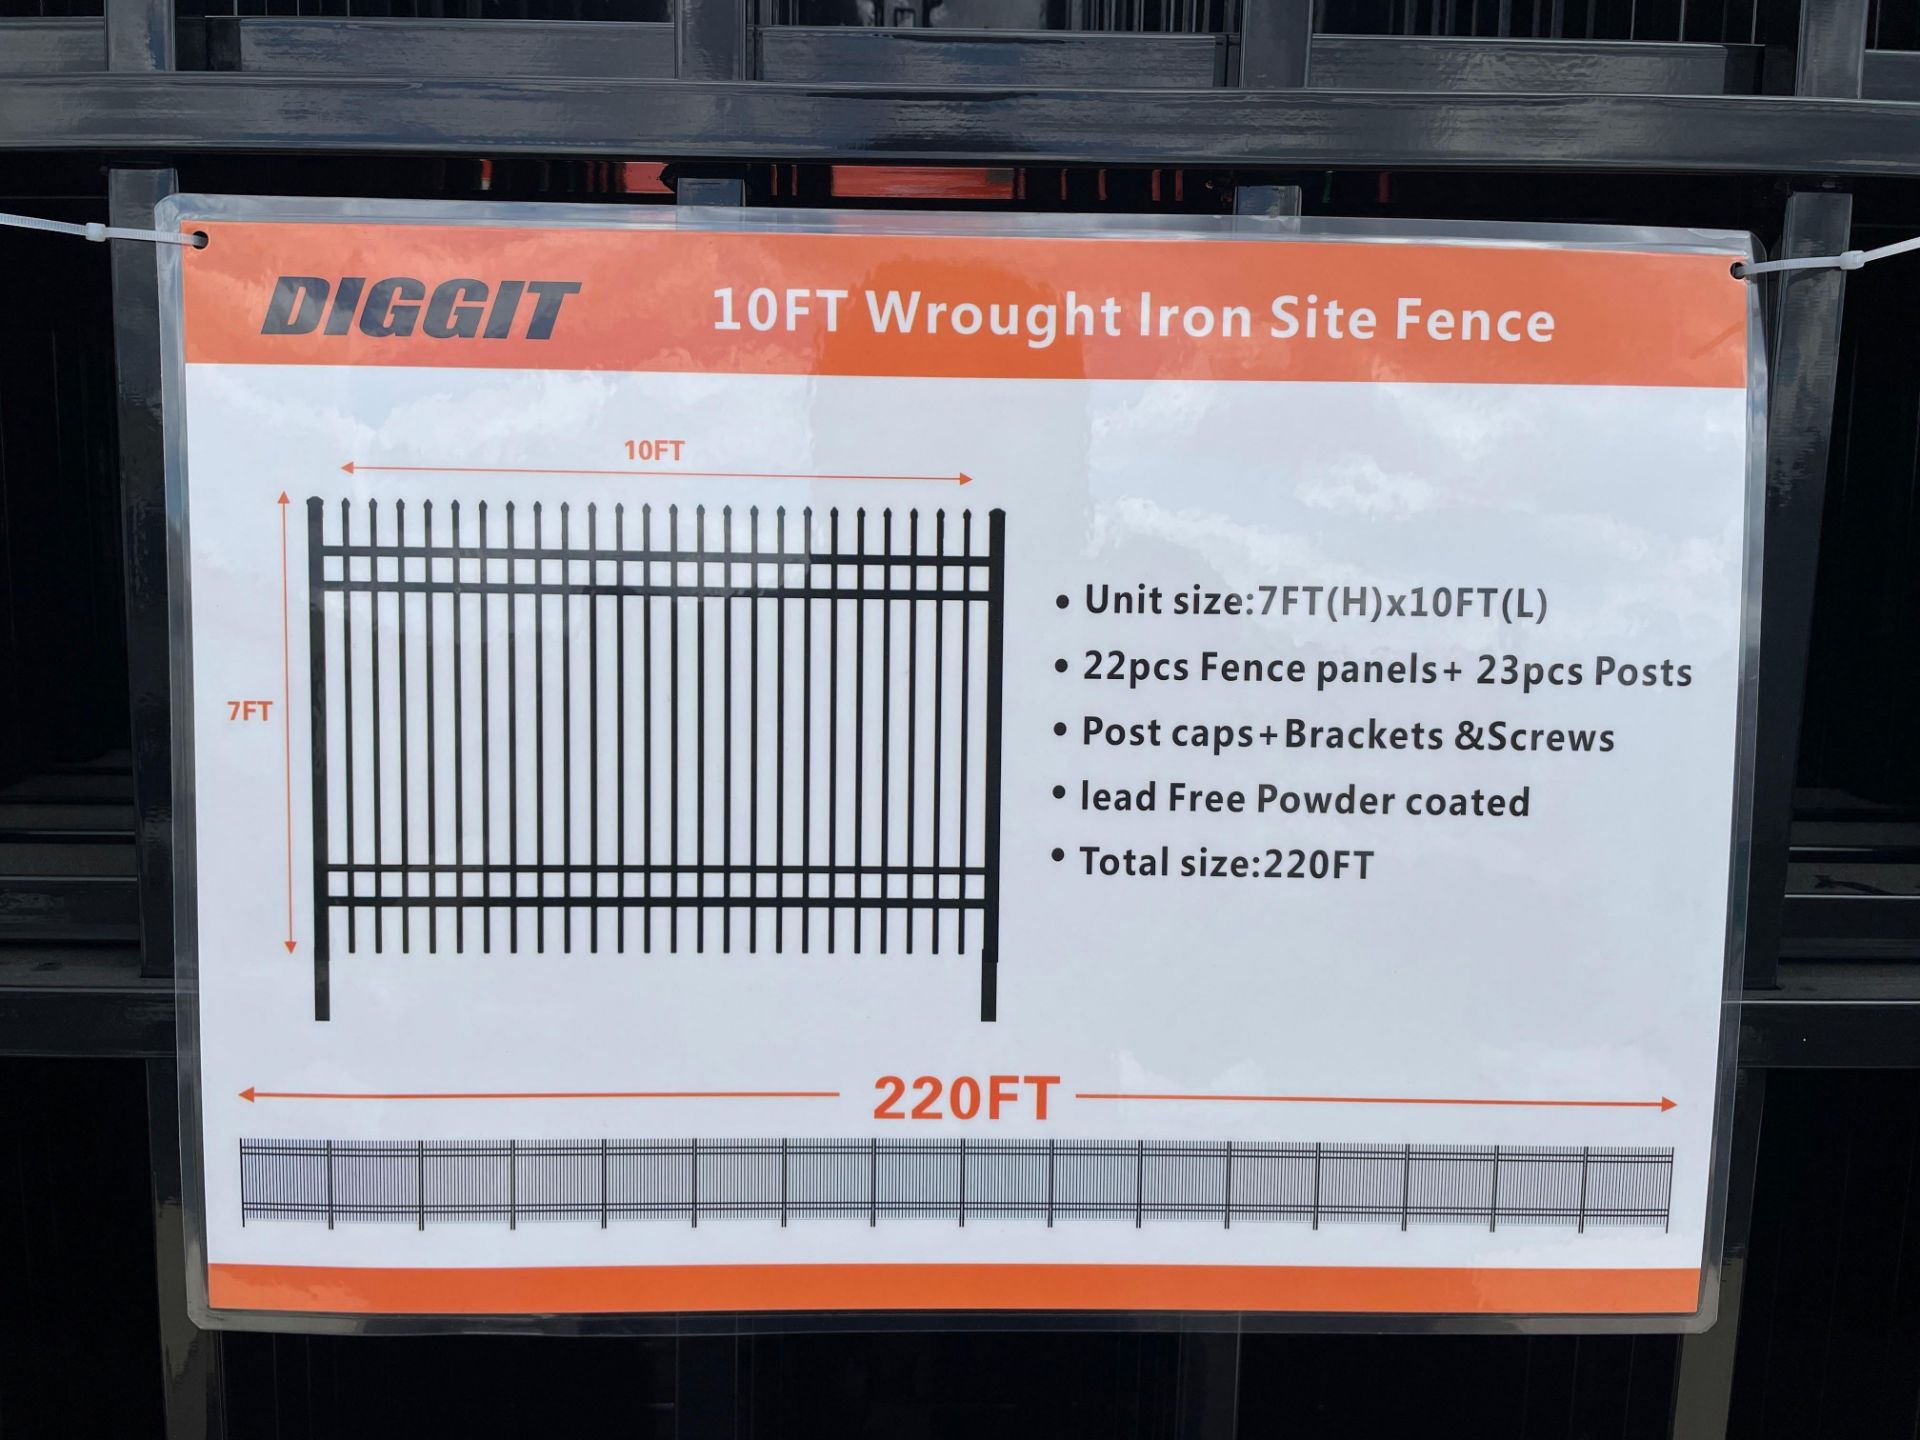 Diggit F10 Wrought Iron Fencing - Image 6 of 6